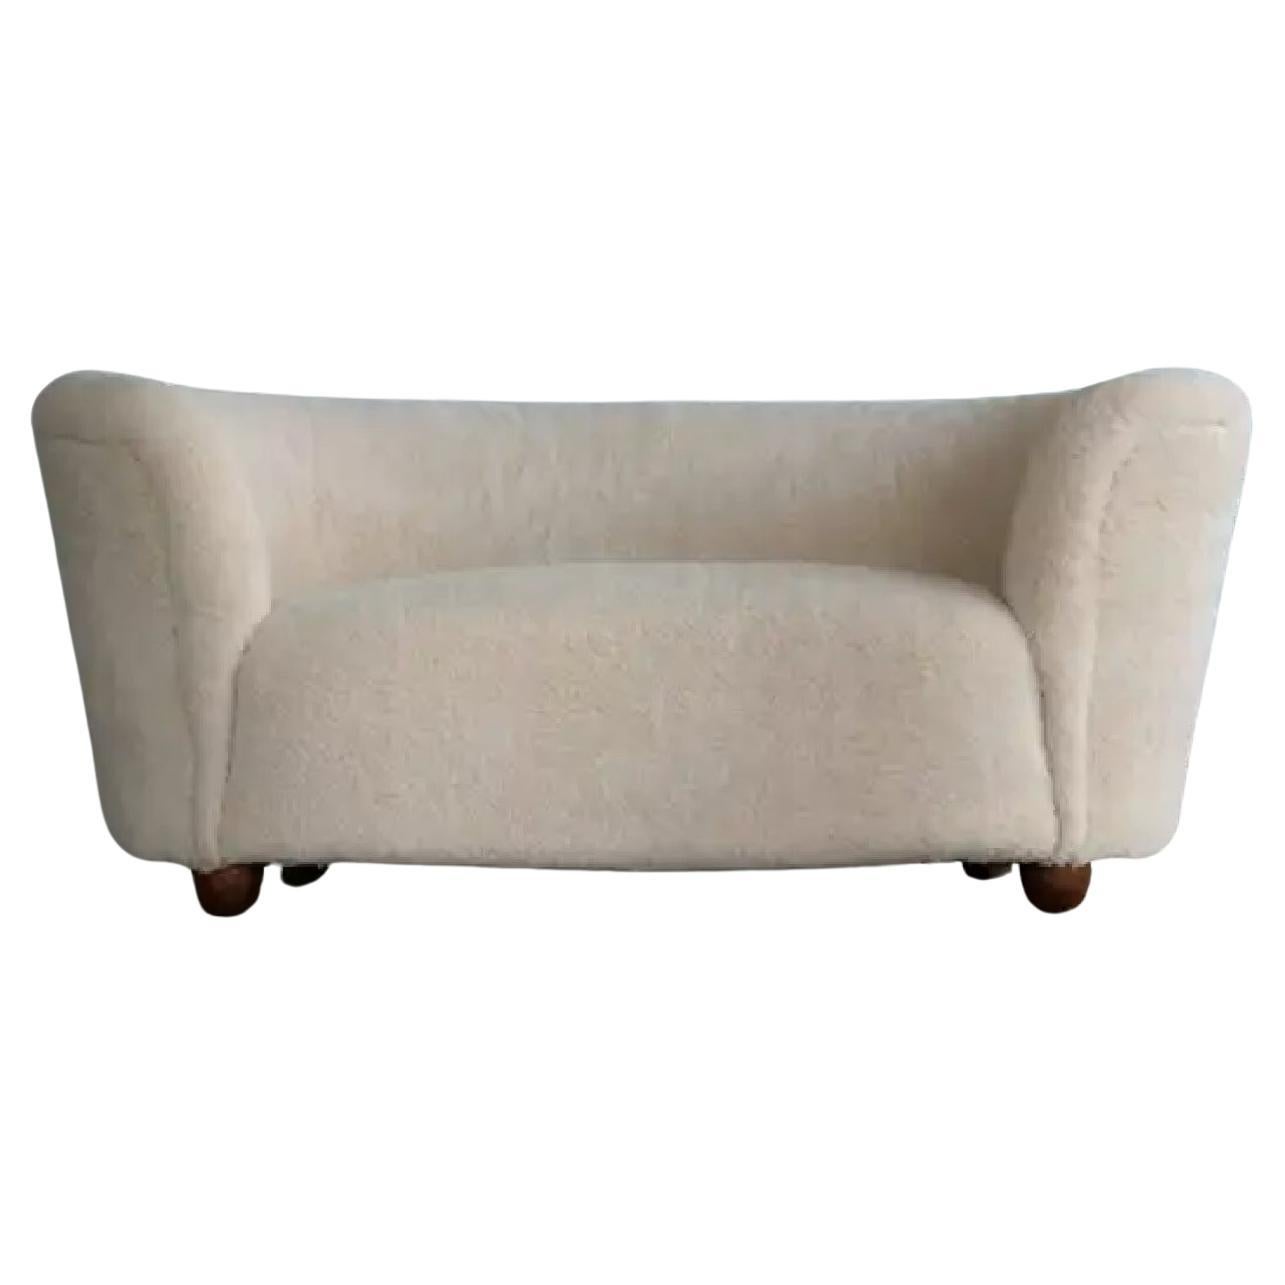 Danish 1940s Banana Shaped Curved Loveseat in Beige Lambswool For Sale